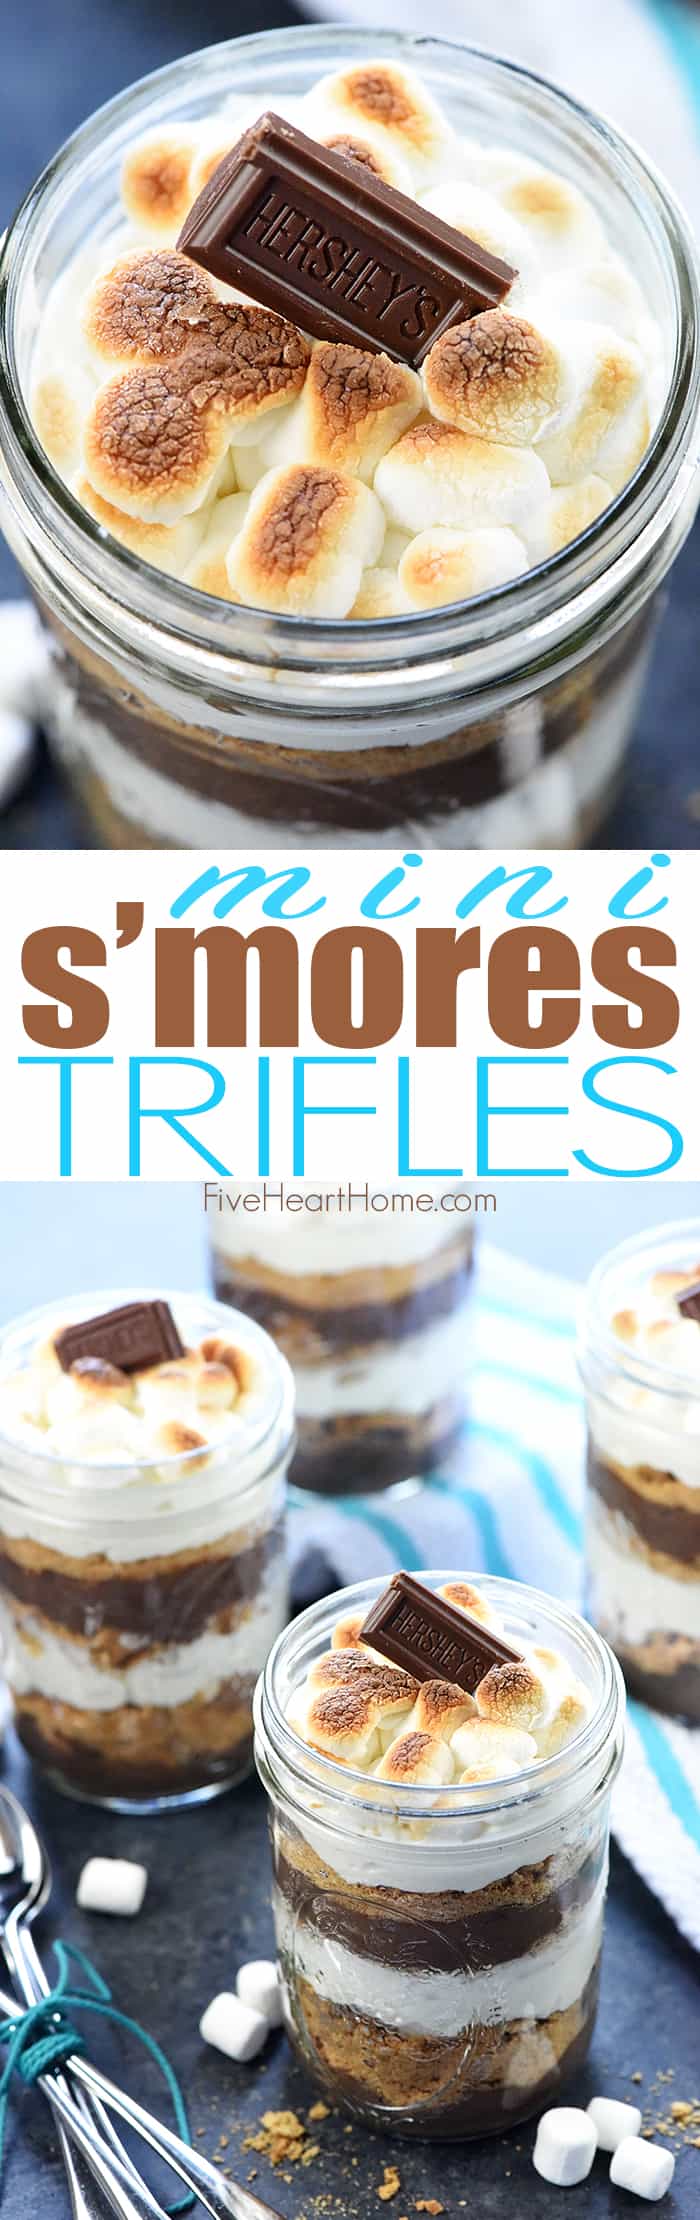 Mini S'mores Trifles ~ layered with rich chocolate pudding, crushed graham crackers, and marshmallow-laced whipped cream for a simple, yummy, no-bake dessert! | FiveHeartHome.com via @fivehearthome